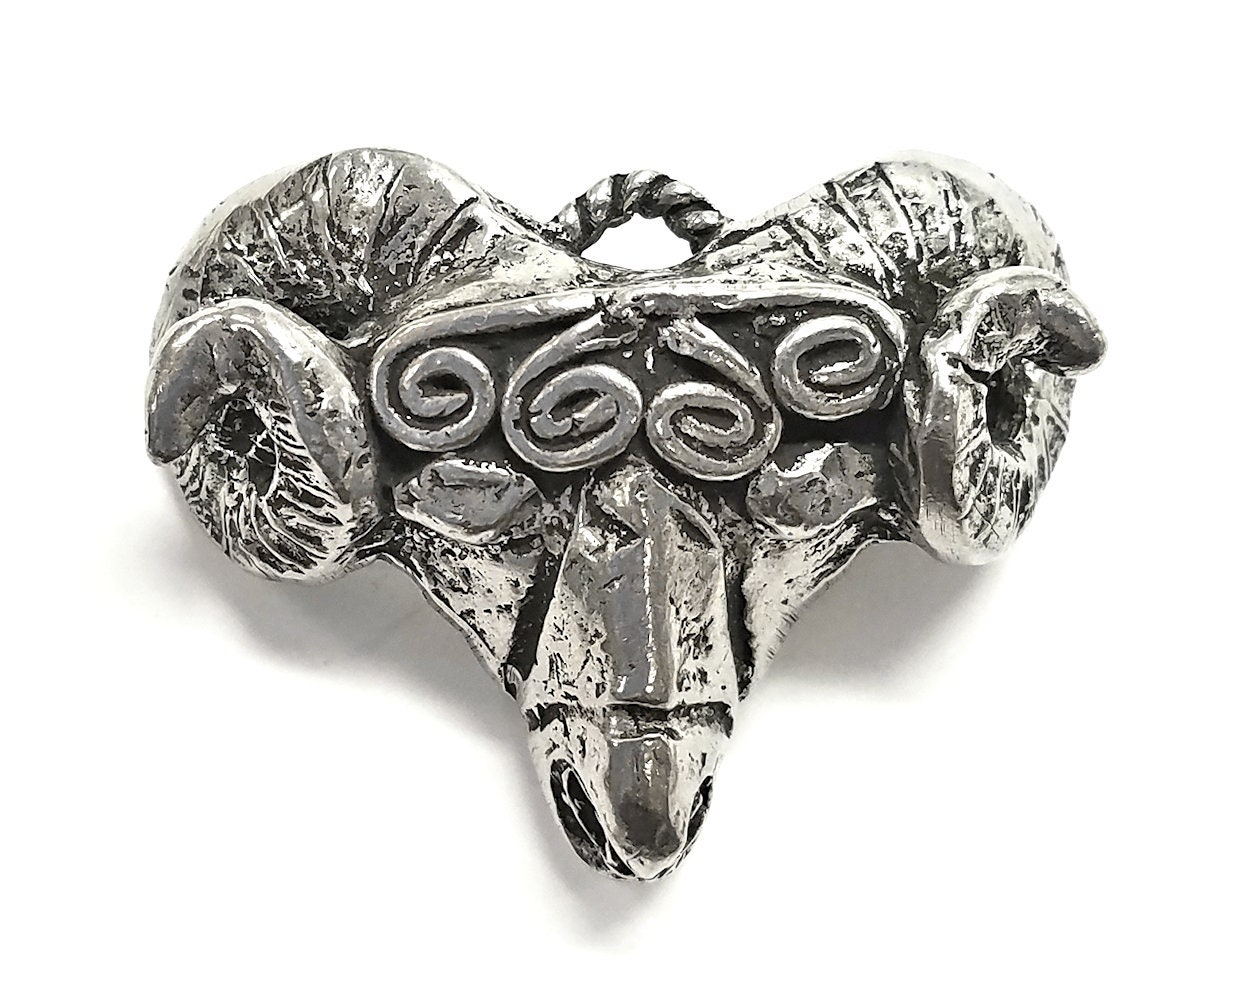 Norse Ram Pewter Pendant By Ram's Horn Studio